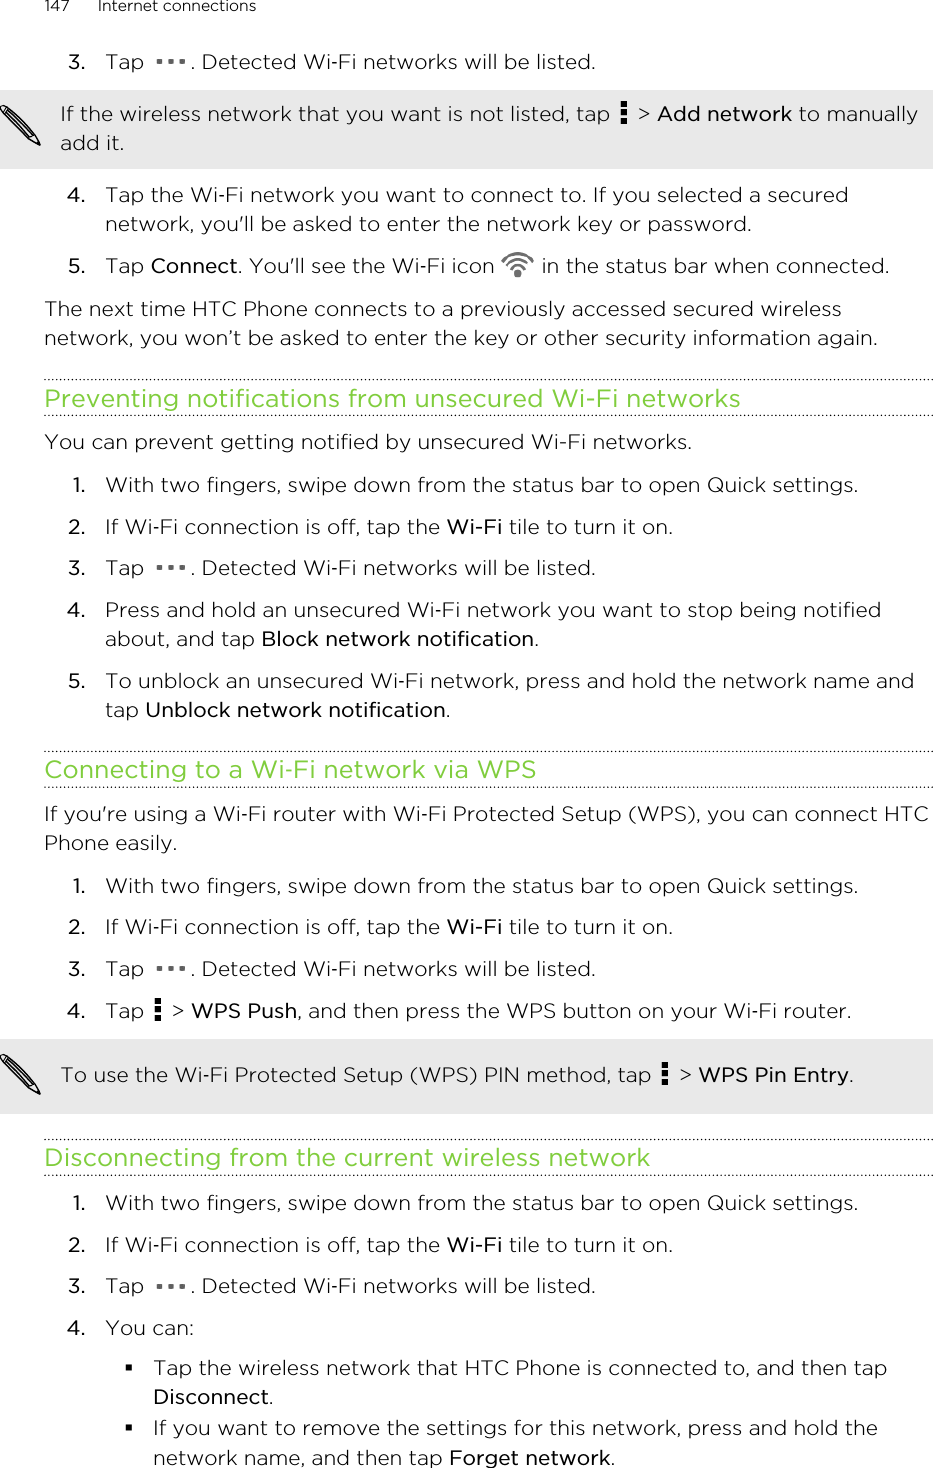 3. Tap  . Detected Wi‑Fi networks will be listed.If the wireless network that you want is not listed, tap   &gt; Add network to manuallyadd it.4. Tap the Wi‑Fi network you want to connect to. If you selected a securednetwork, you&apos;ll be asked to enter the network key or password.5. Tap Connect. You&apos;ll see the Wi‑Fi icon   in the status bar when connected.The next time HTC Phone connects to a previously accessed secured wirelessnetwork, you won’t be asked to enter the key or other security information again.Preventing notifications from unsecured Wi-Fi networksYou can prevent getting notified by unsecured Wi-Fi networks.1. With two fingers, swipe down from the status bar to open Quick settings.2. If Wi‑Fi connection is off, tap the Wi-Fi tile to turn it on.3. Tap  . Detected Wi‑Fi networks will be listed.4. Press and hold an unsecured Wi‑Fi network you want to stop being notifiedabout, and tap Block network notification.5. To unblock an unsecured Wi‑Fi network, press and hold the network name andtap Unblock network notification.Connecting to a Wi‑Fi network via WPSIf you&apos;re using a Wi‑Fi router with Wi‑Fi Protected Setup (WPS), you can connect HTCPhone easily.1. With two fingers, swipe down from the status bar to open Quick settings.2. If Wi‑Fi connection is off, tap the Wi-Fi tile to turn it on.3. Tap  . Detected Wi‑Fi networks will be listed.4. Tap   &gt; WPS Push, and then press the WPS button on your Wi‑Fi router. To use the Wi‑Fi Protected Setup (WPS) PIN method, tap   &gt; WPS Pin Entry.Disconnecting from the current wireless network1. With two fingers, swipe down from the status bar to open Quick settings.2. If Wi‑Fi connection is off, tap the Wi-Fi tile to turn it on.3. Tap  . Detected Wi‑Fi networks will be listed.4. You can:§Tap the wireless network that HTC Phone is connected to, and then tapDisconnect.§If you want to remove the settings for this network, press and hold thenetwork name, and then tap Forget network.147 Internet connectionsHTC Confidential for Certification HTC Confidential for Certification